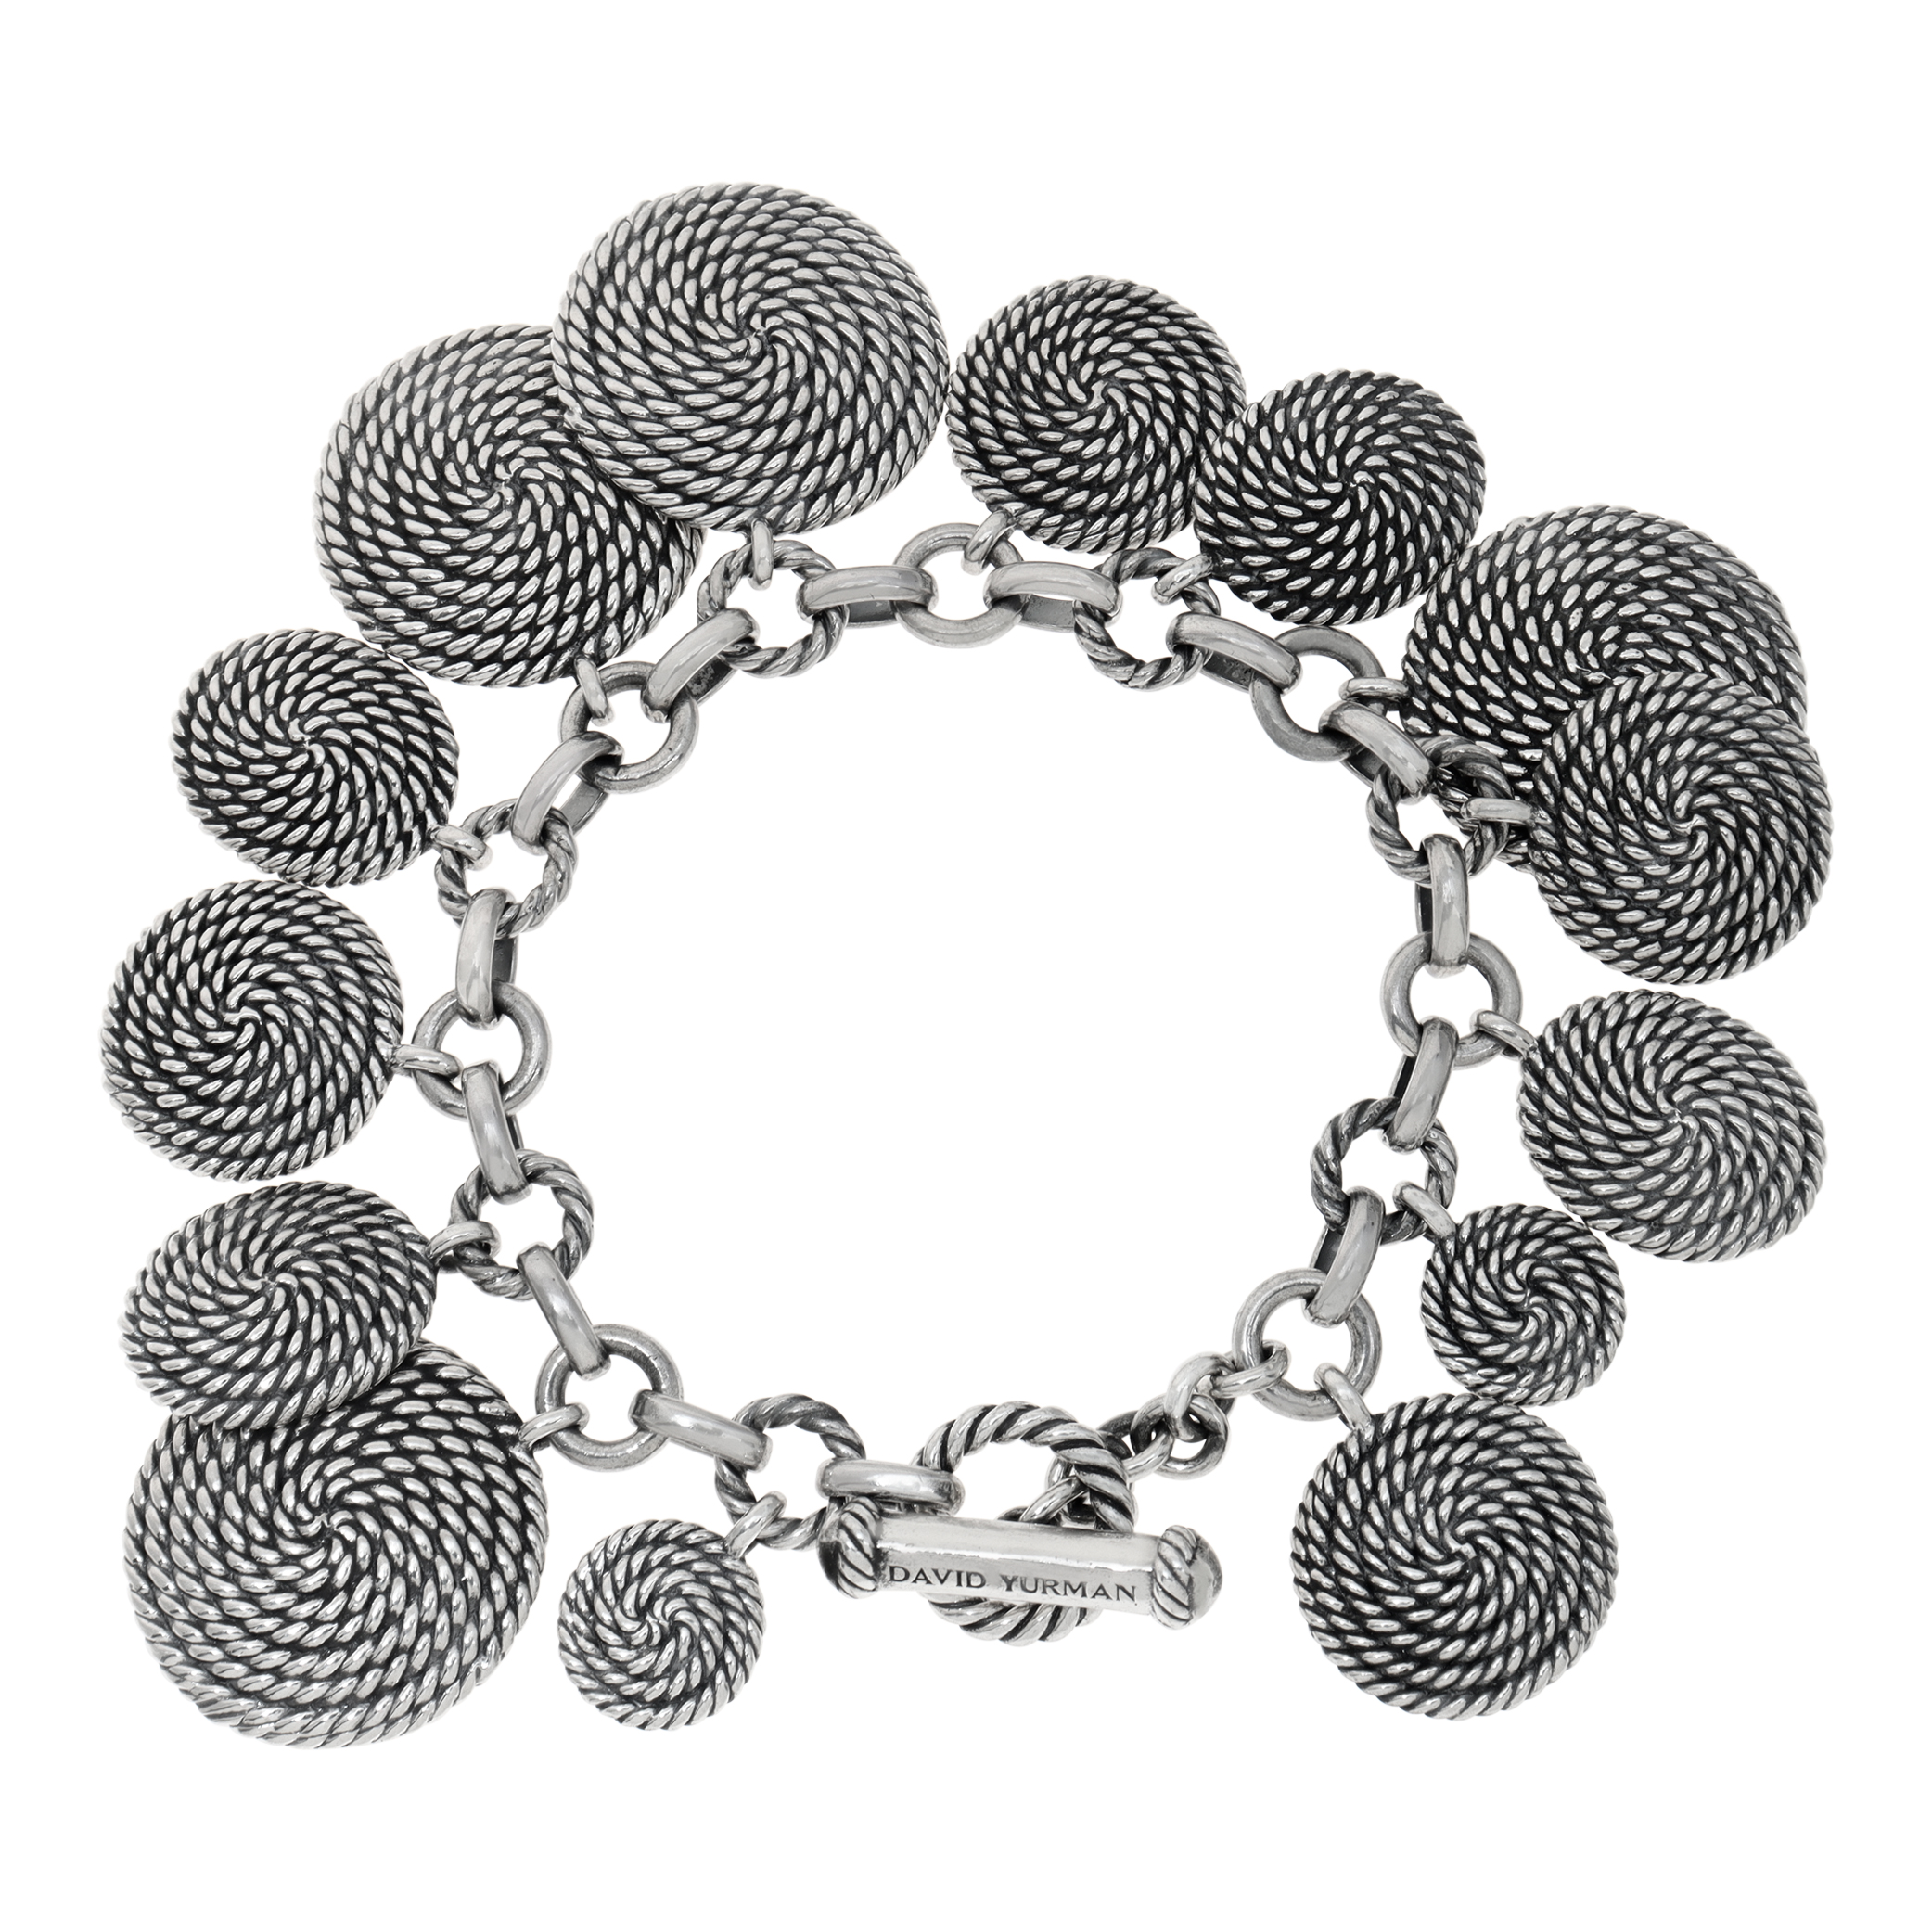 David Yurman Cable Coil charm bracelet in sterling silver